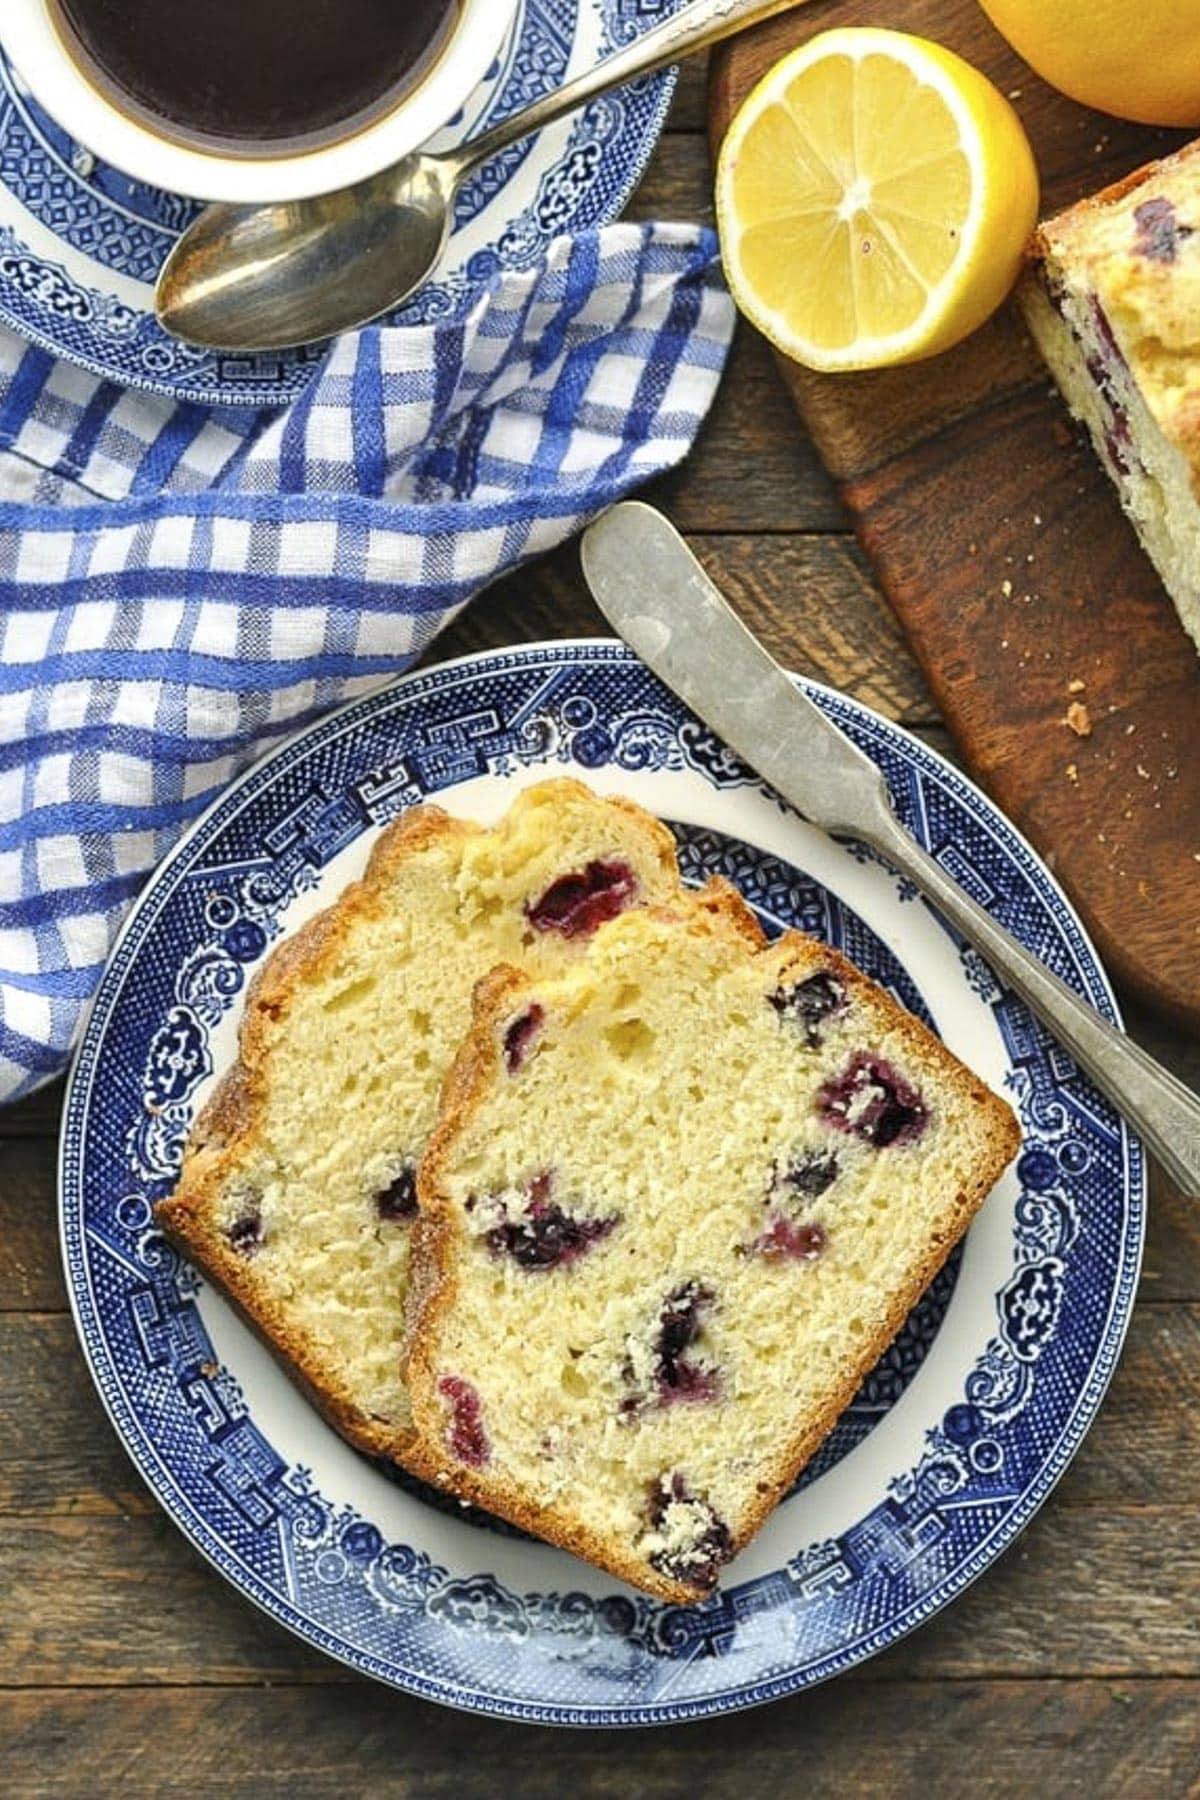 Overhead shot of a plate of lemon blueberry bread on a wooden table.